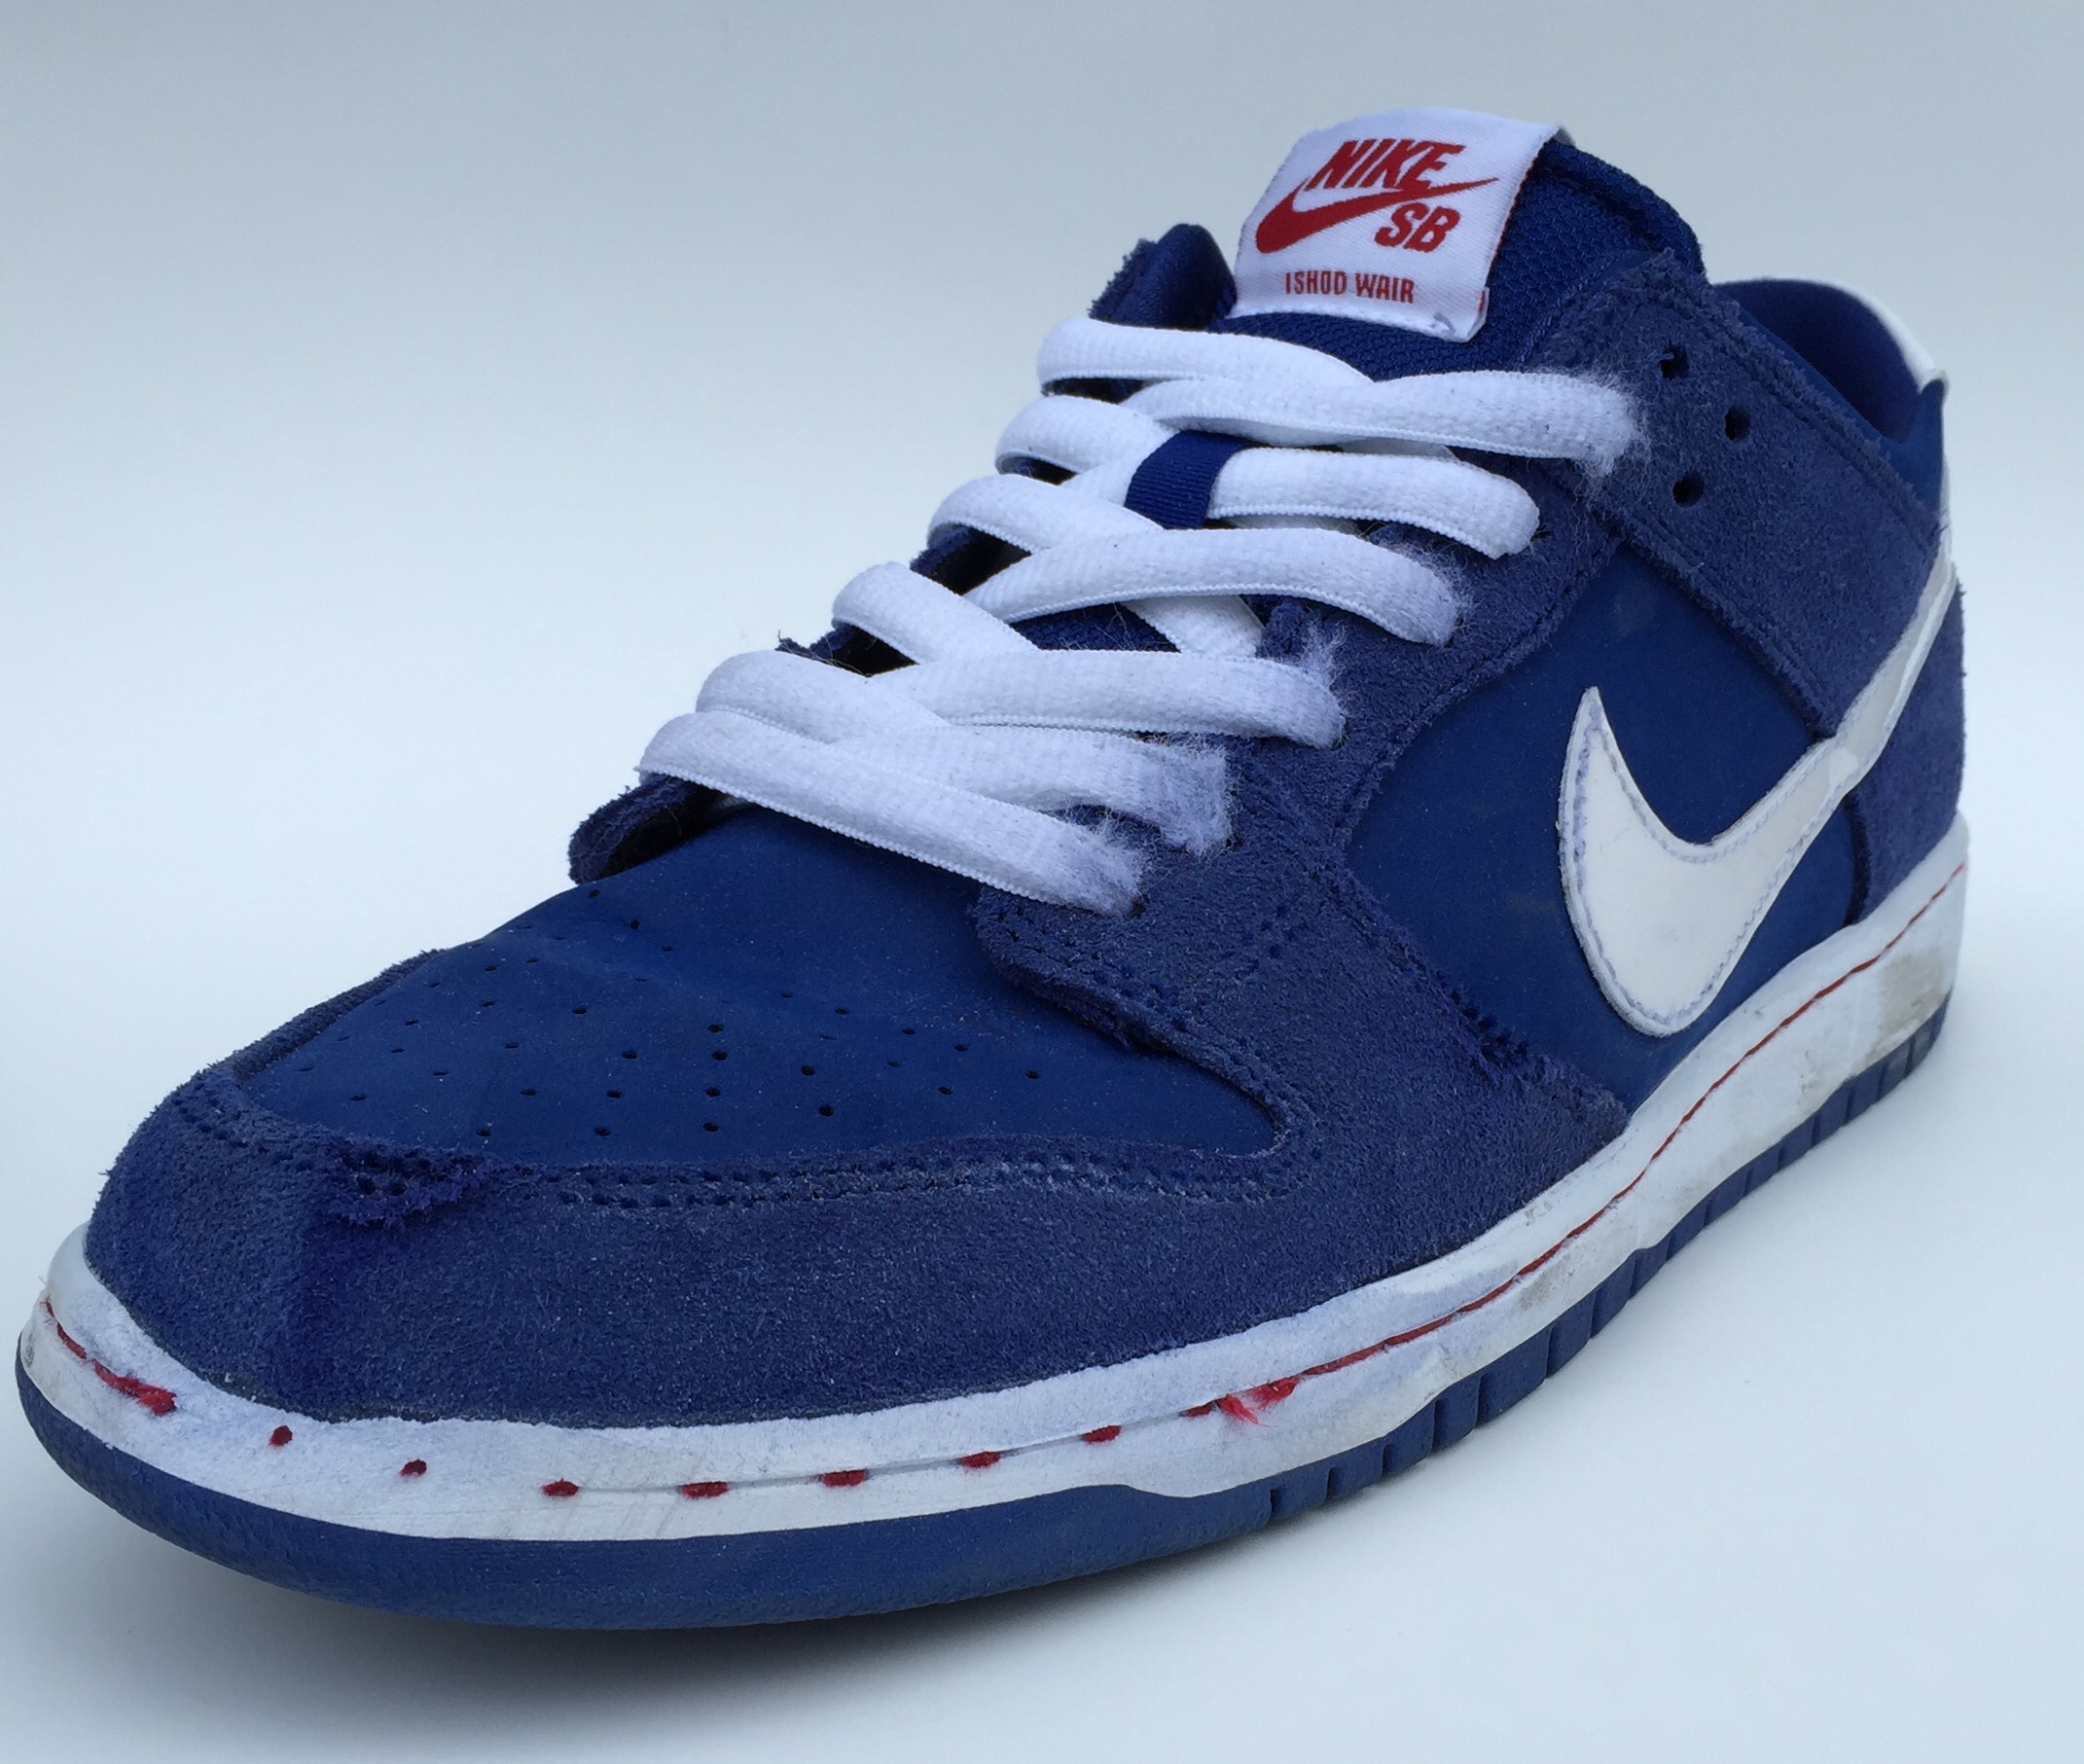 SB Dunk Low Pro IW - Weartested - detailed skate shoe reviews